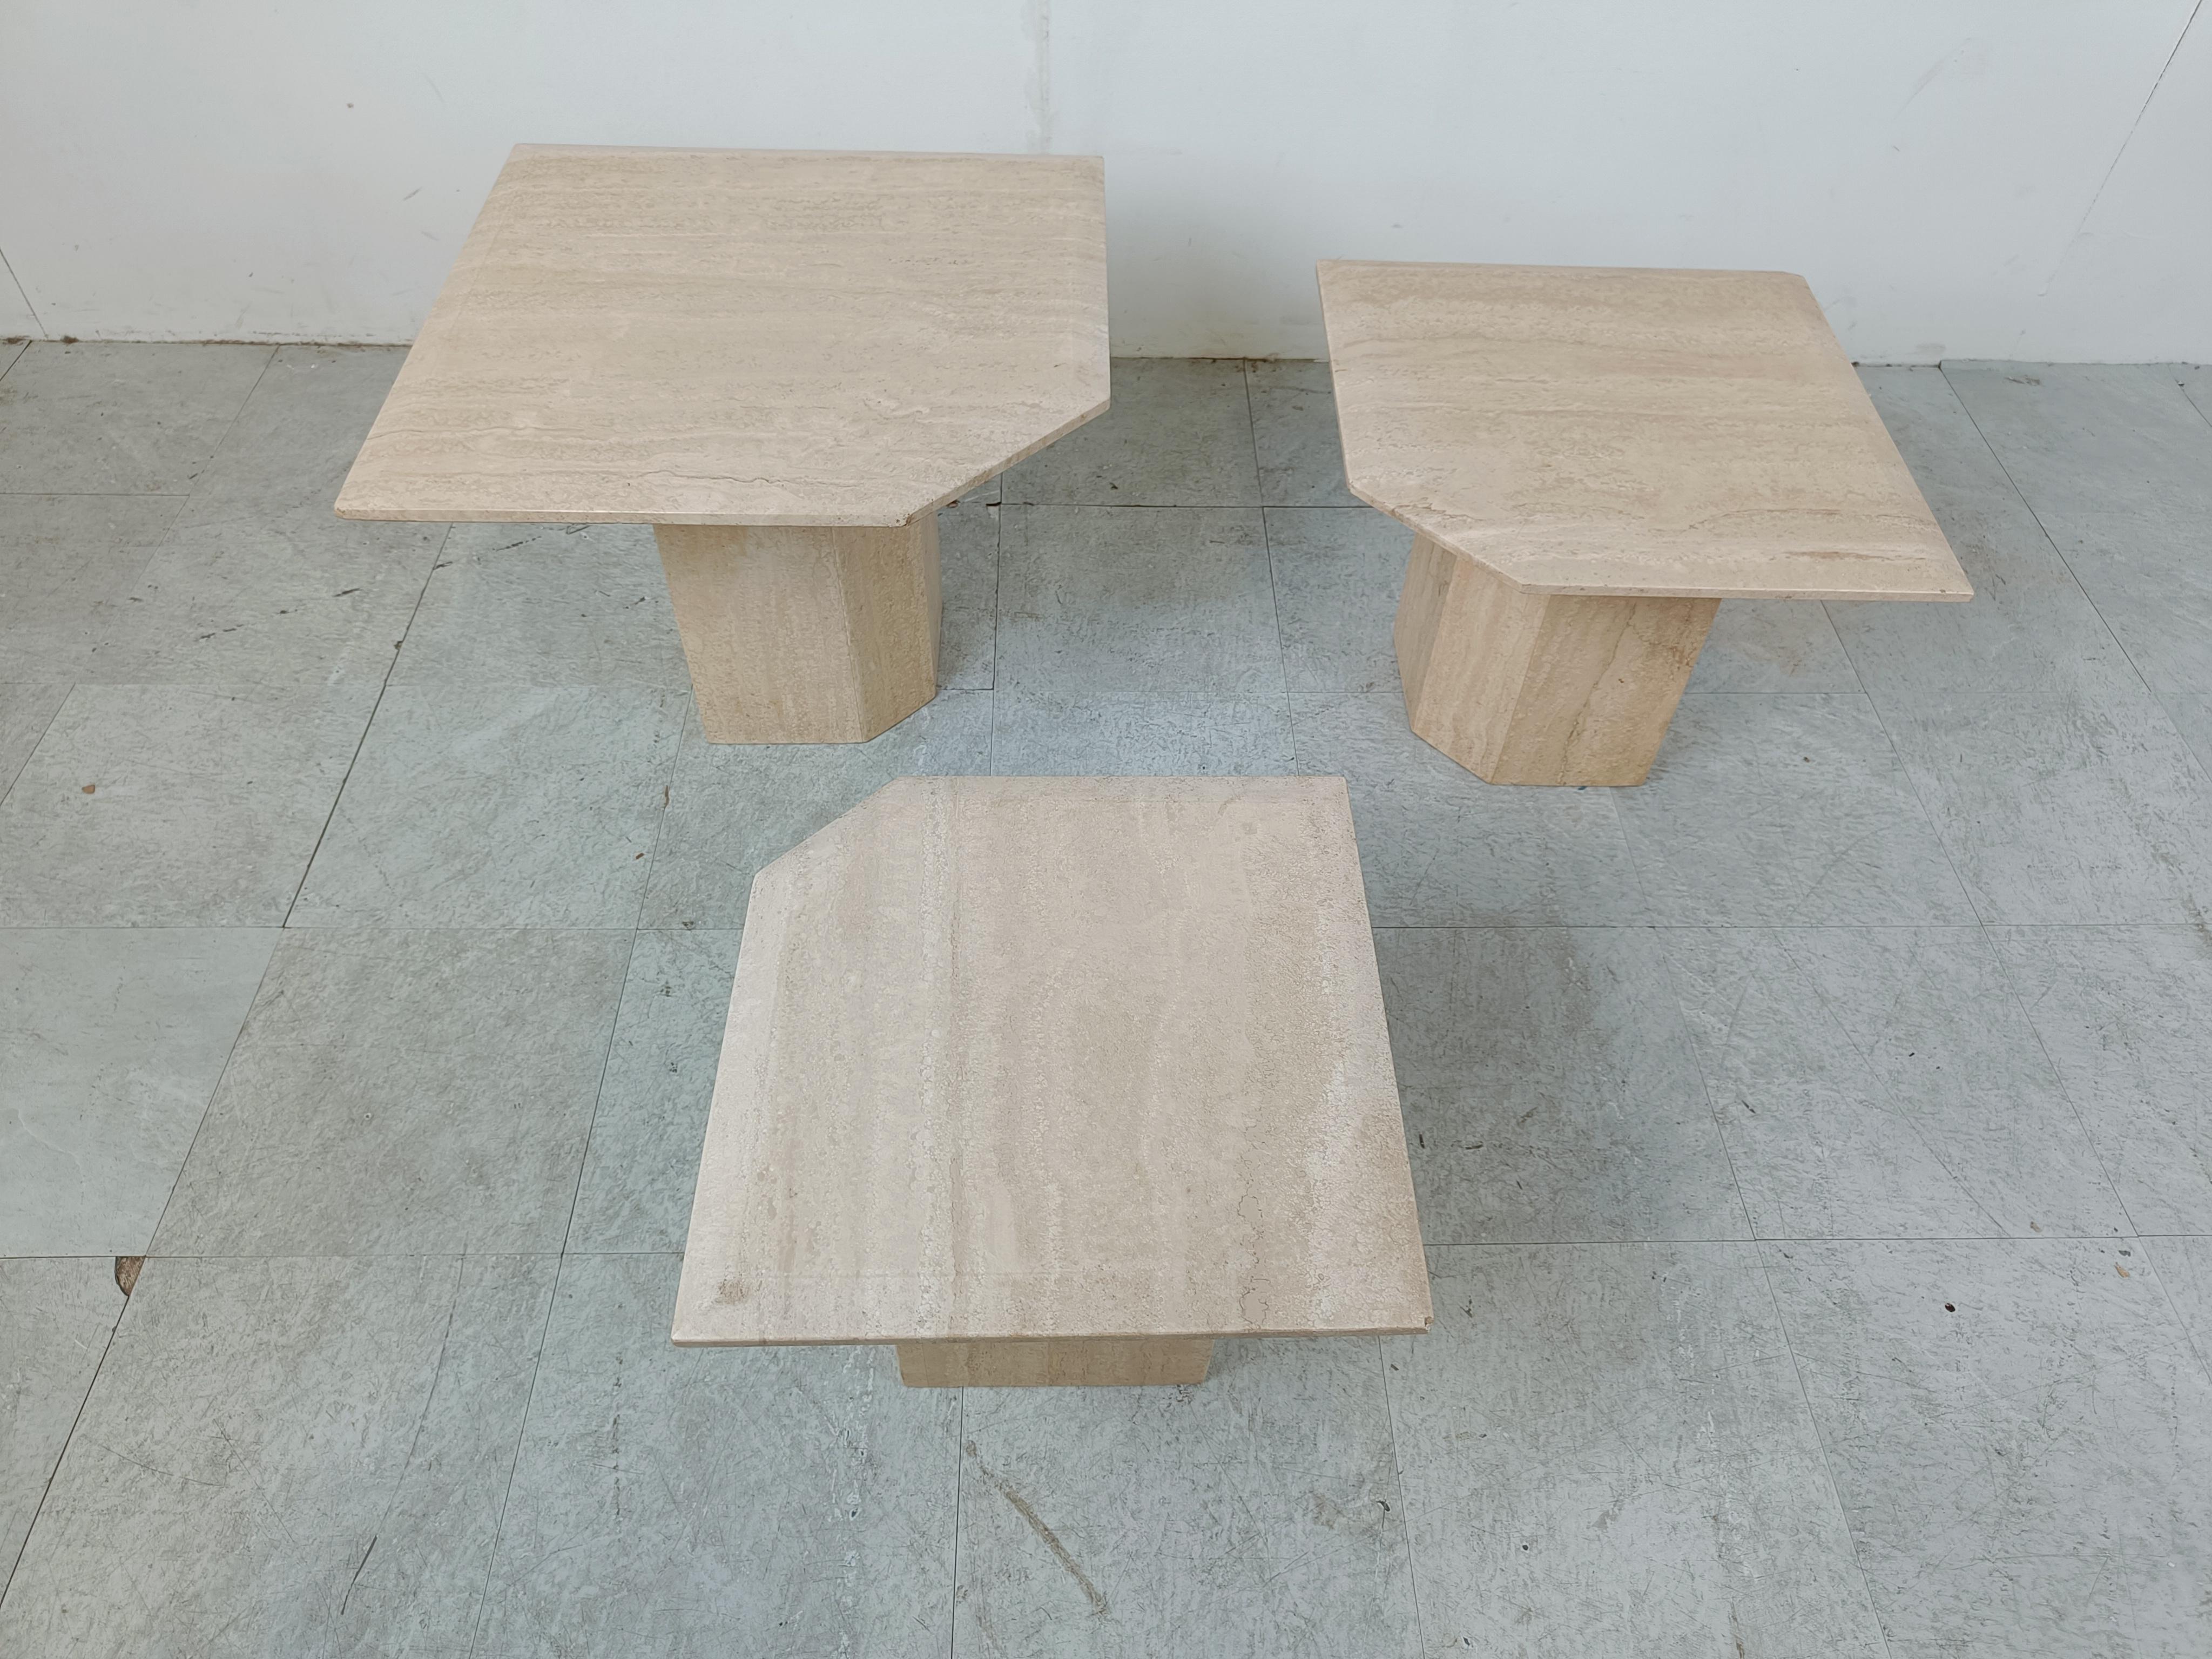 Set of 1970s italian travertine stone nesting tables or side tables.

The tables can be set up in different compositions. Timeless items.

Beautiful colour.

Very good condition

1970s - italy

Dimensions:
Largest table: 42x55x55cm

Ref.: